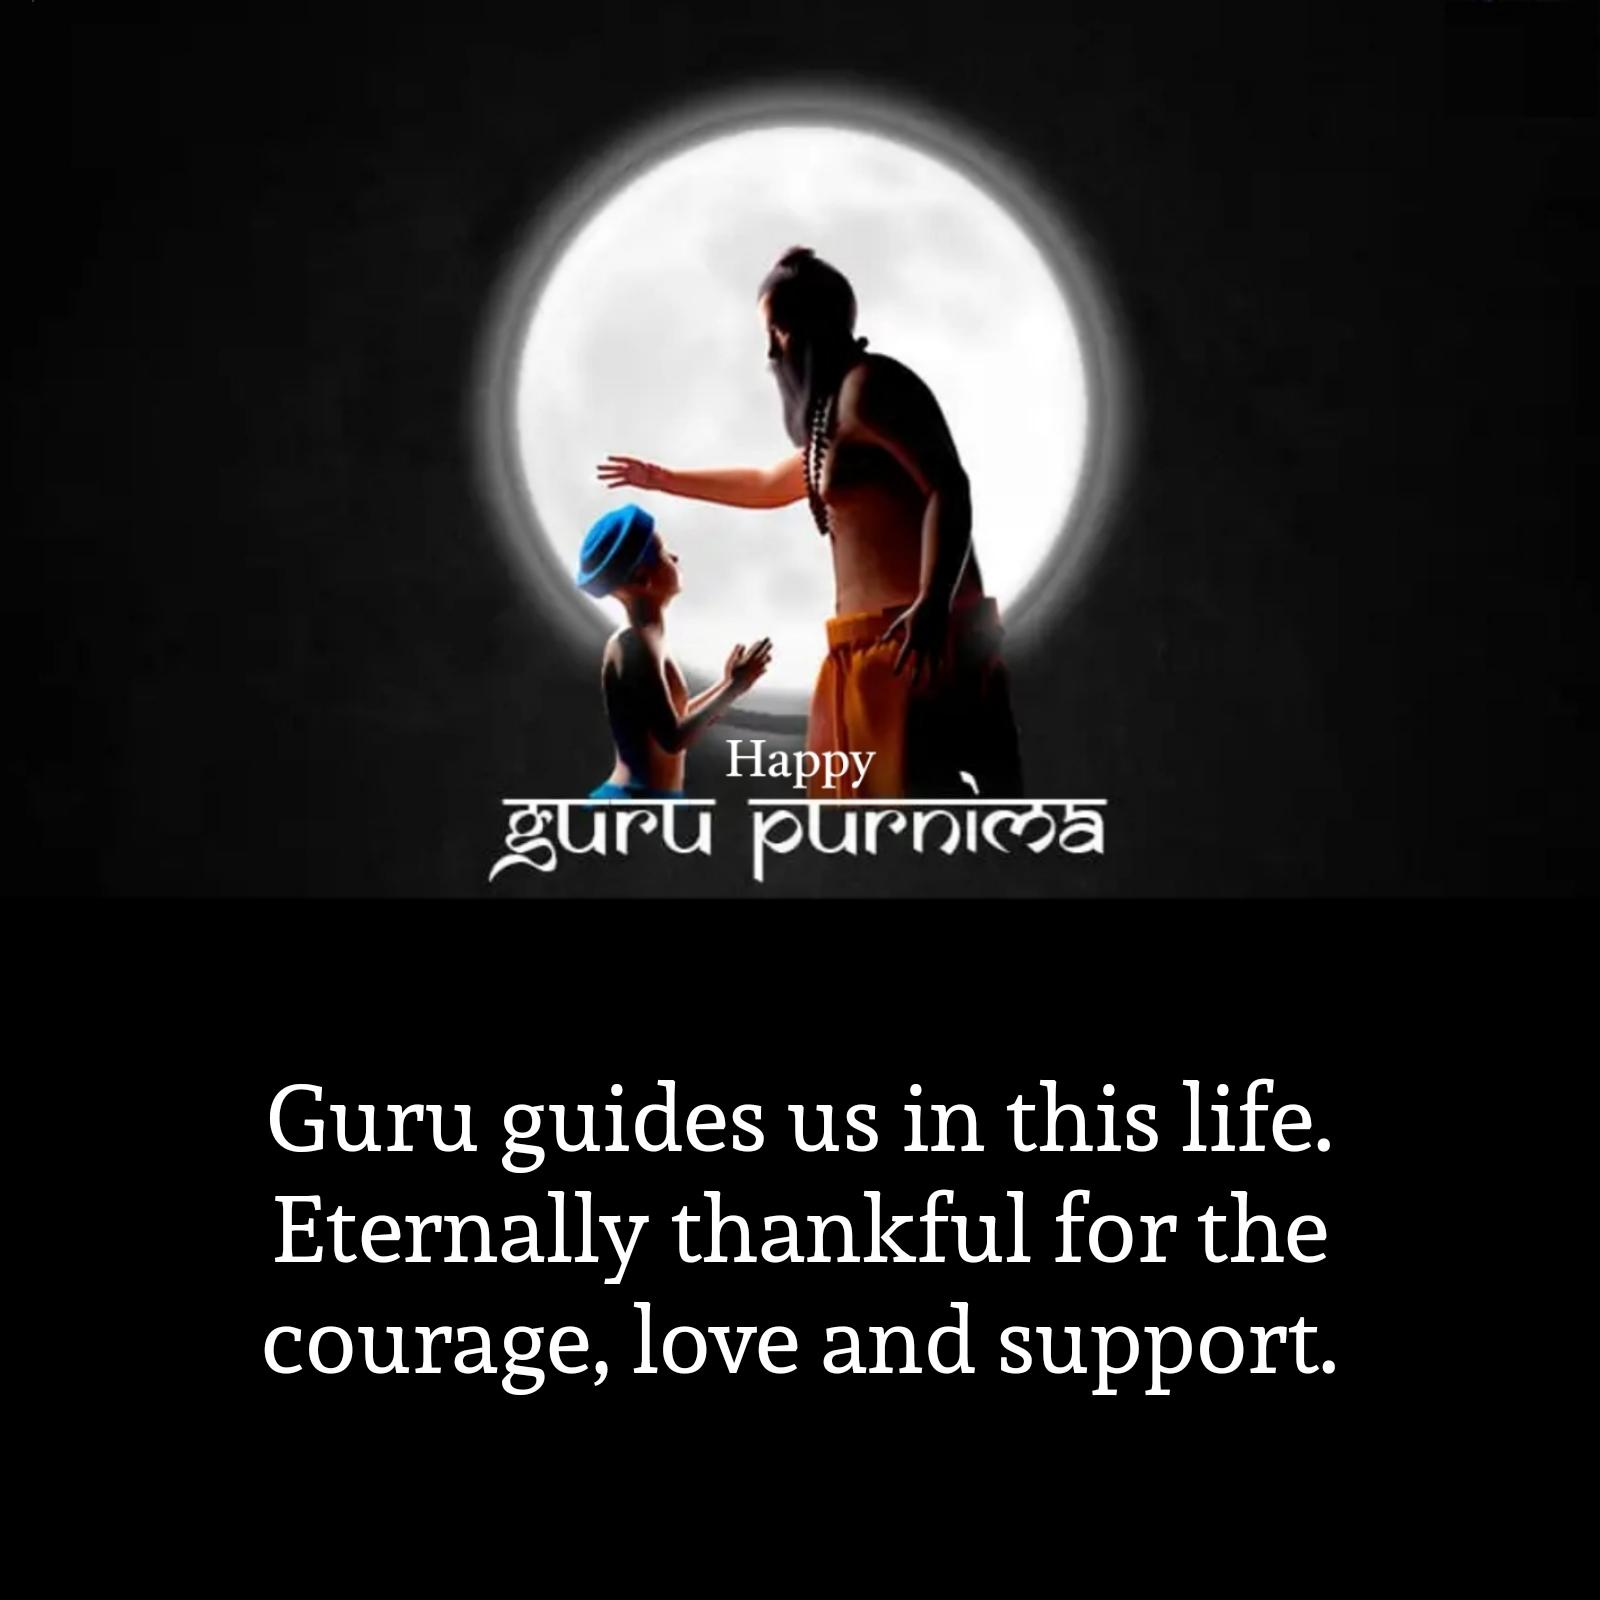 Guru guides us in this life Eternally thankful for the courage